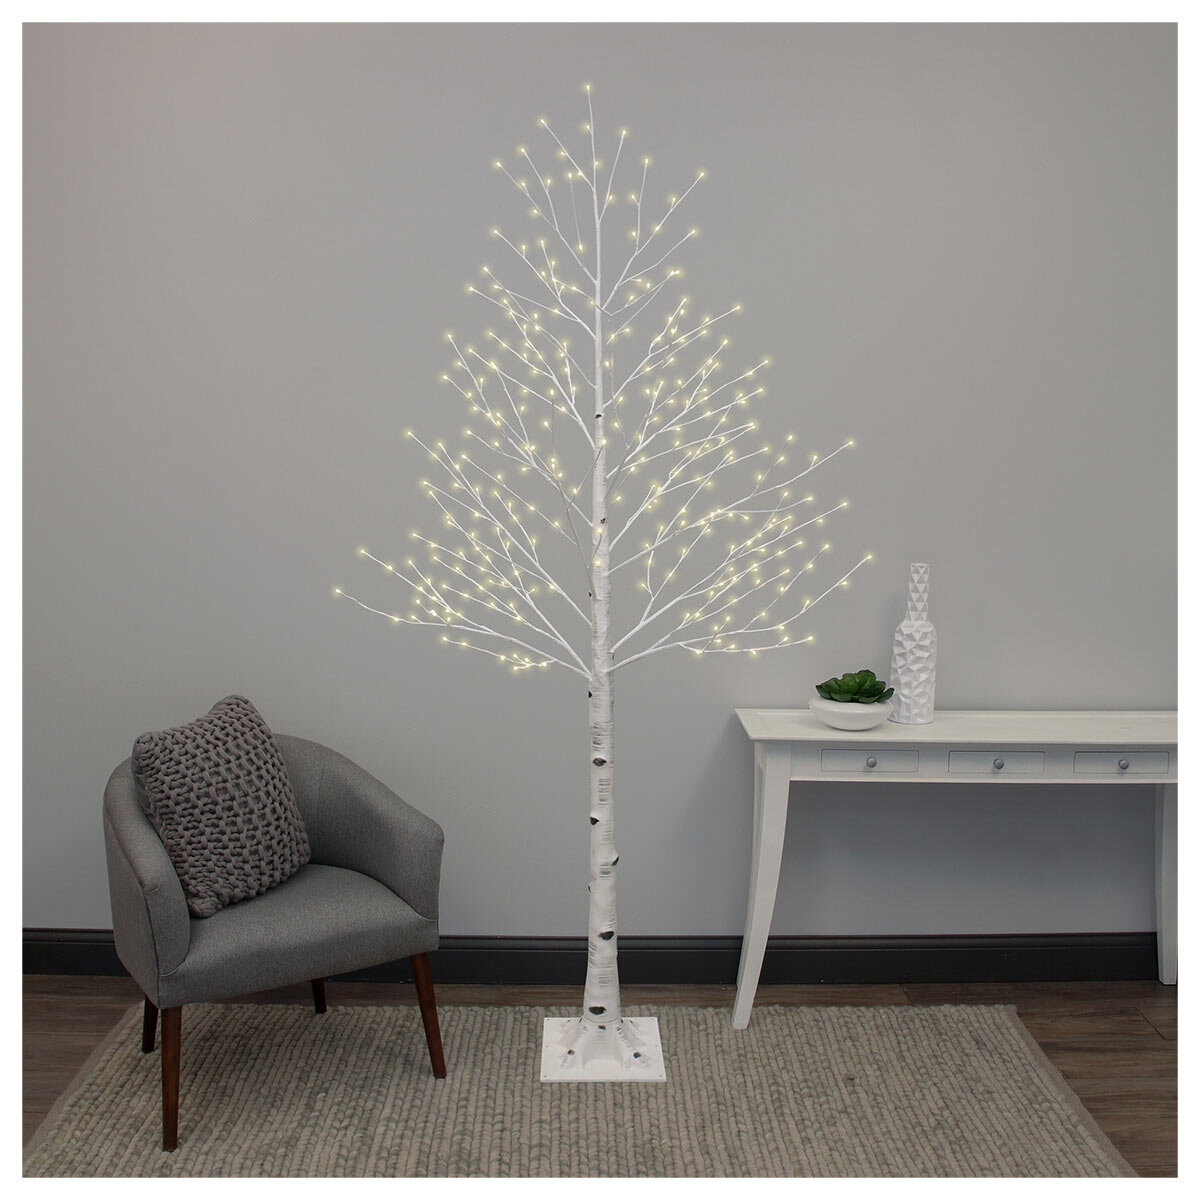 Buy Colour Select LED Birch Tree Lifestyle2 Image at Costco.co.uk